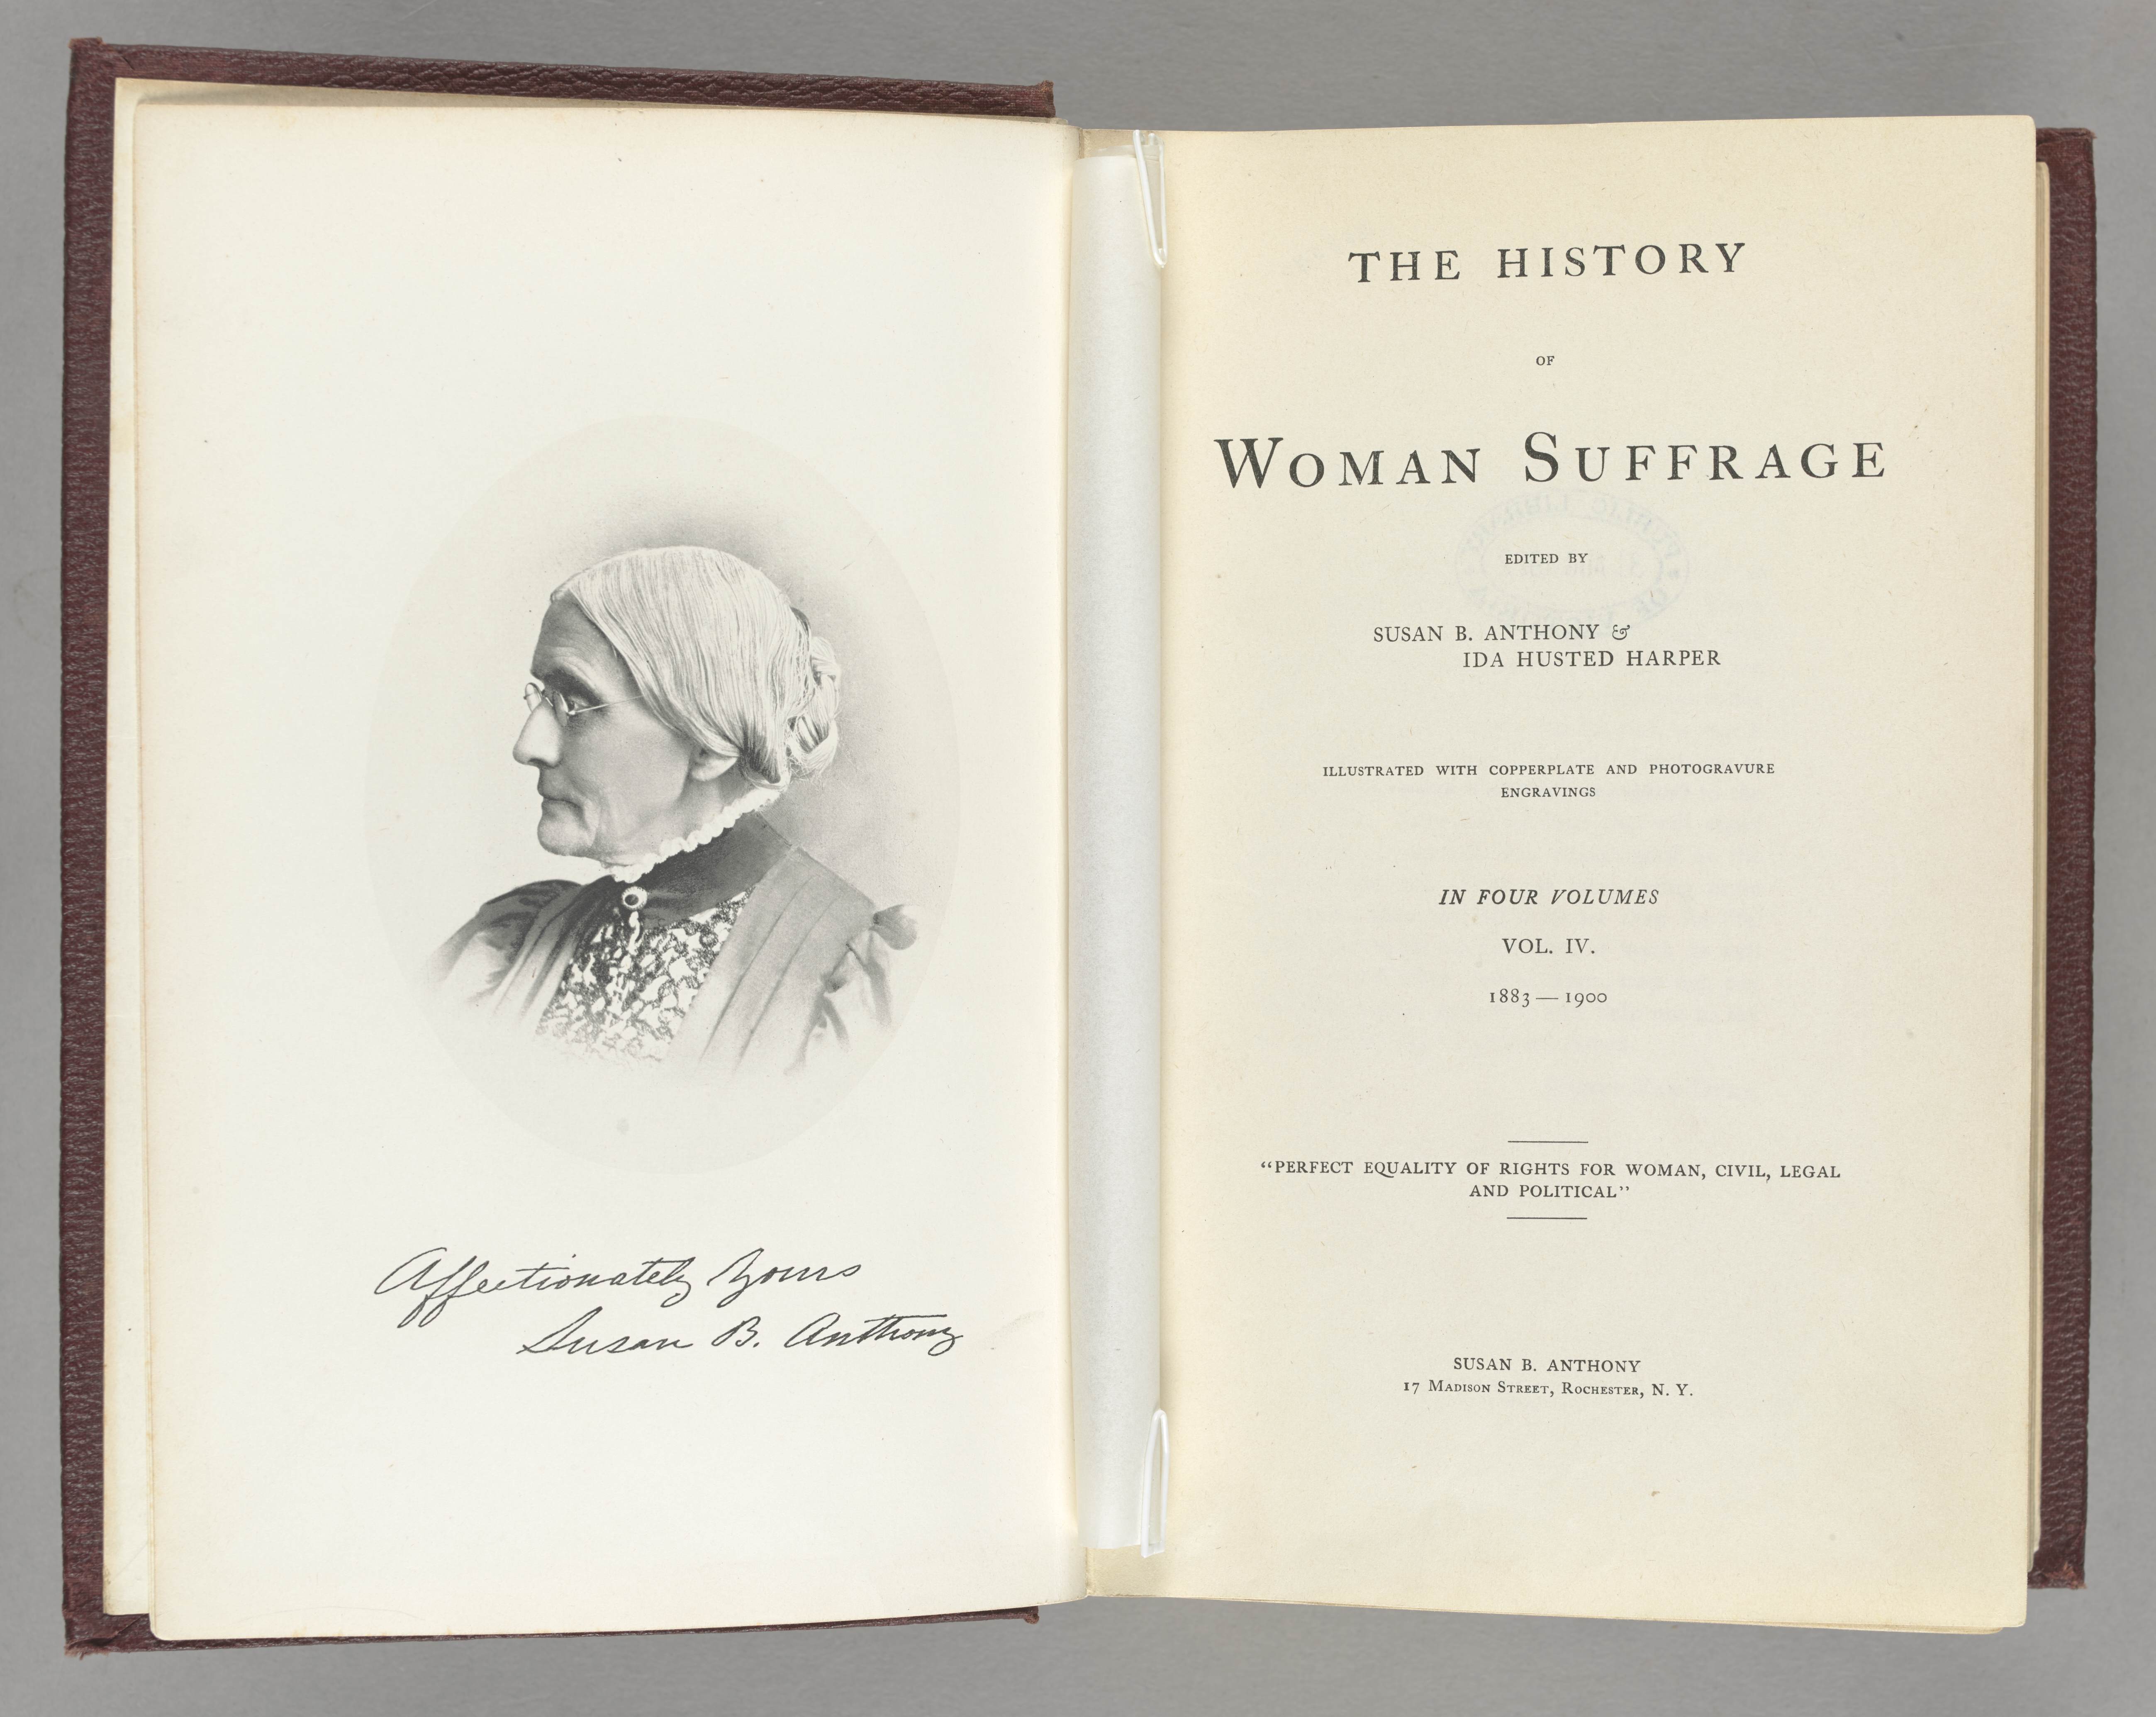 The title page of 'The history of woman suffrage', edited by Susan B. Anthony and Ida Husted Harper, vol. 4, 1902, with a frontispiece portrait of Susan B. Anthony. 